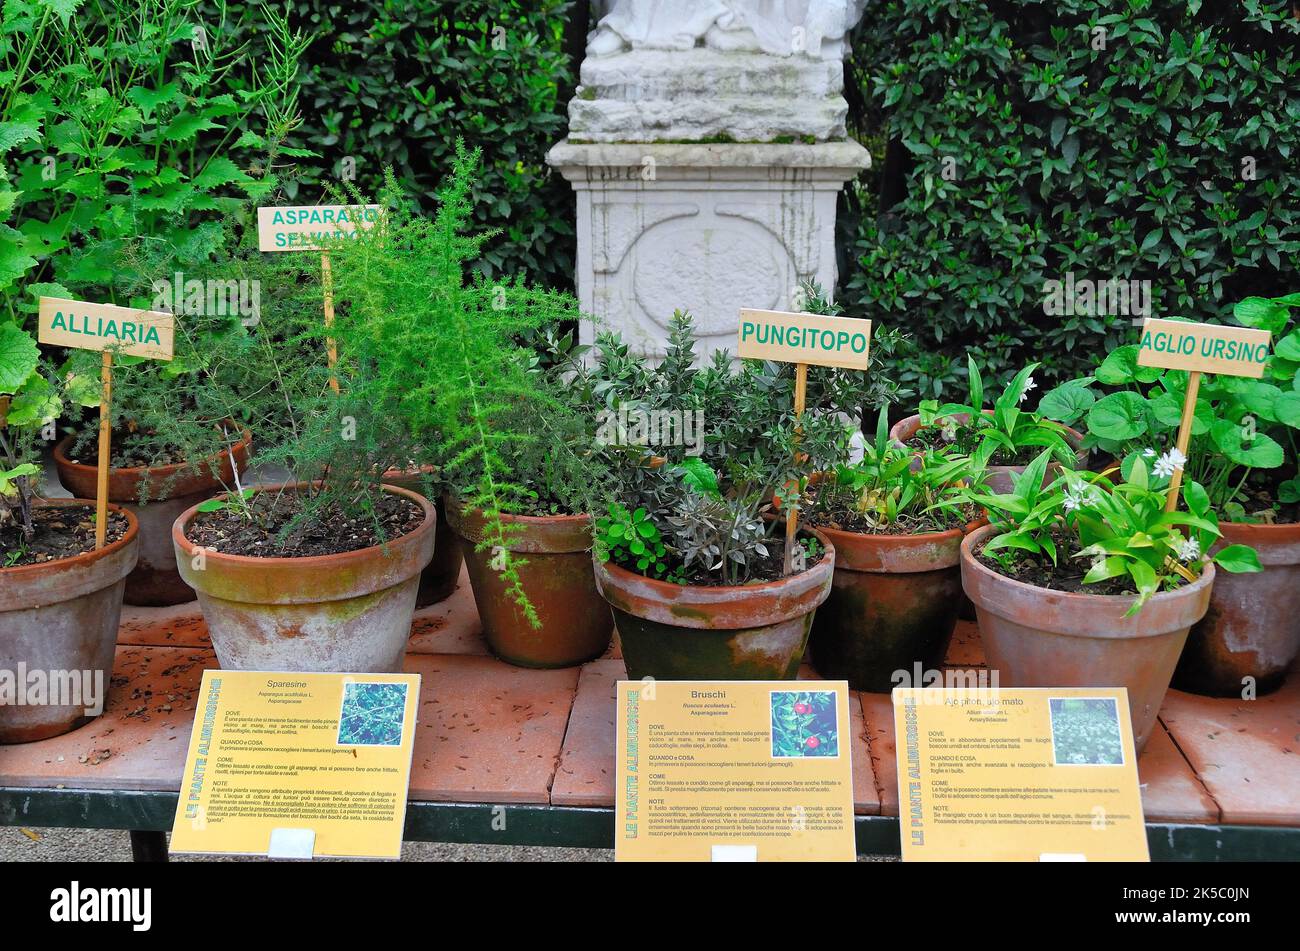 The University of Padua Botanical Garden. The Botanical Garden of the University of Padua was established in 1545 for the cultivation of medicinal plants. Plants of the Mediterranean wood Stock Photo